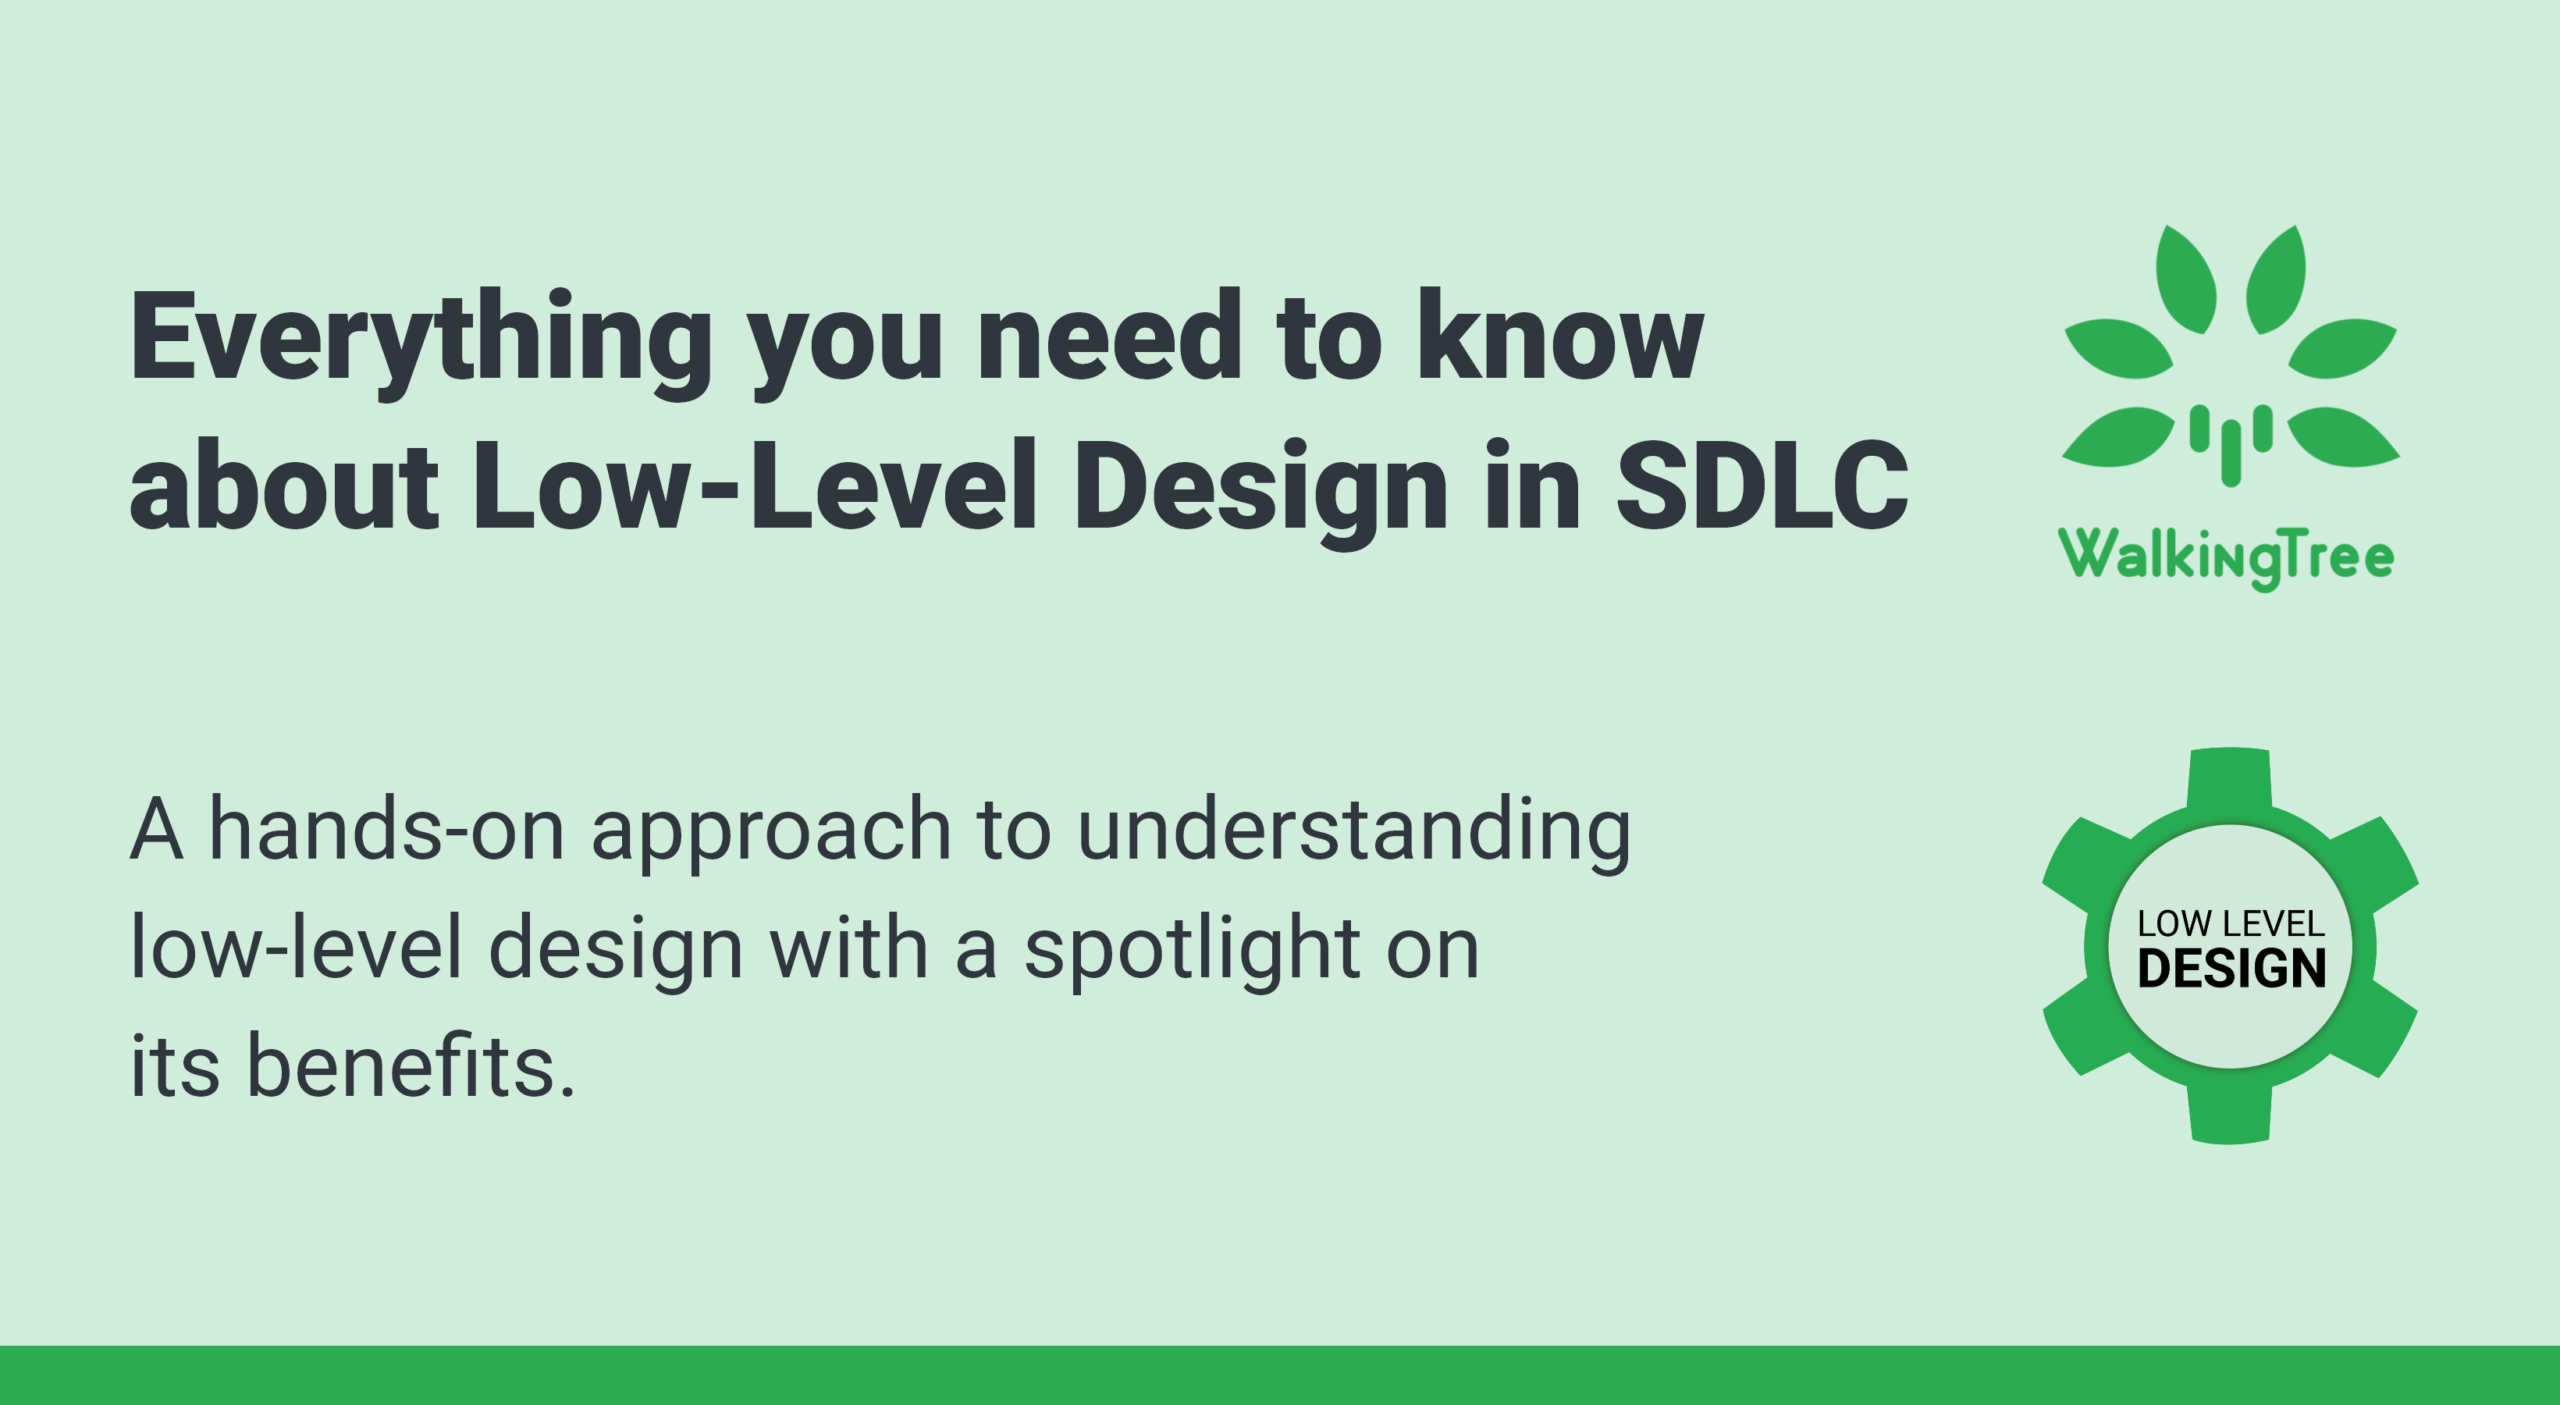 Everything you need to know about Low-Level Design in SDLC